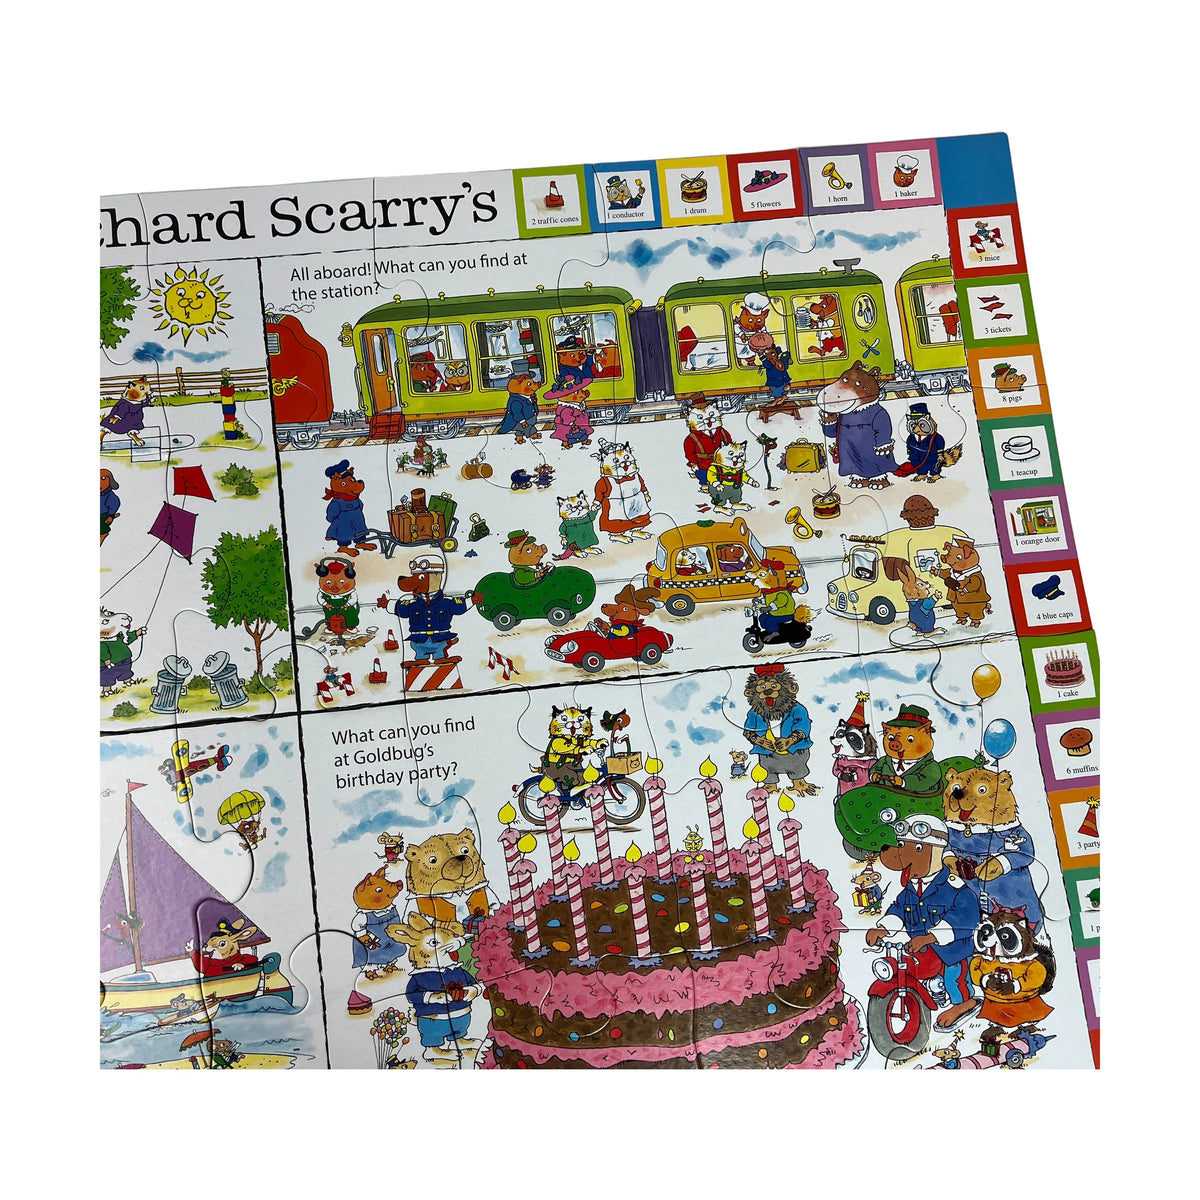 Richard Scarry's Busytown Seek & Find Floor Puzzle Cover